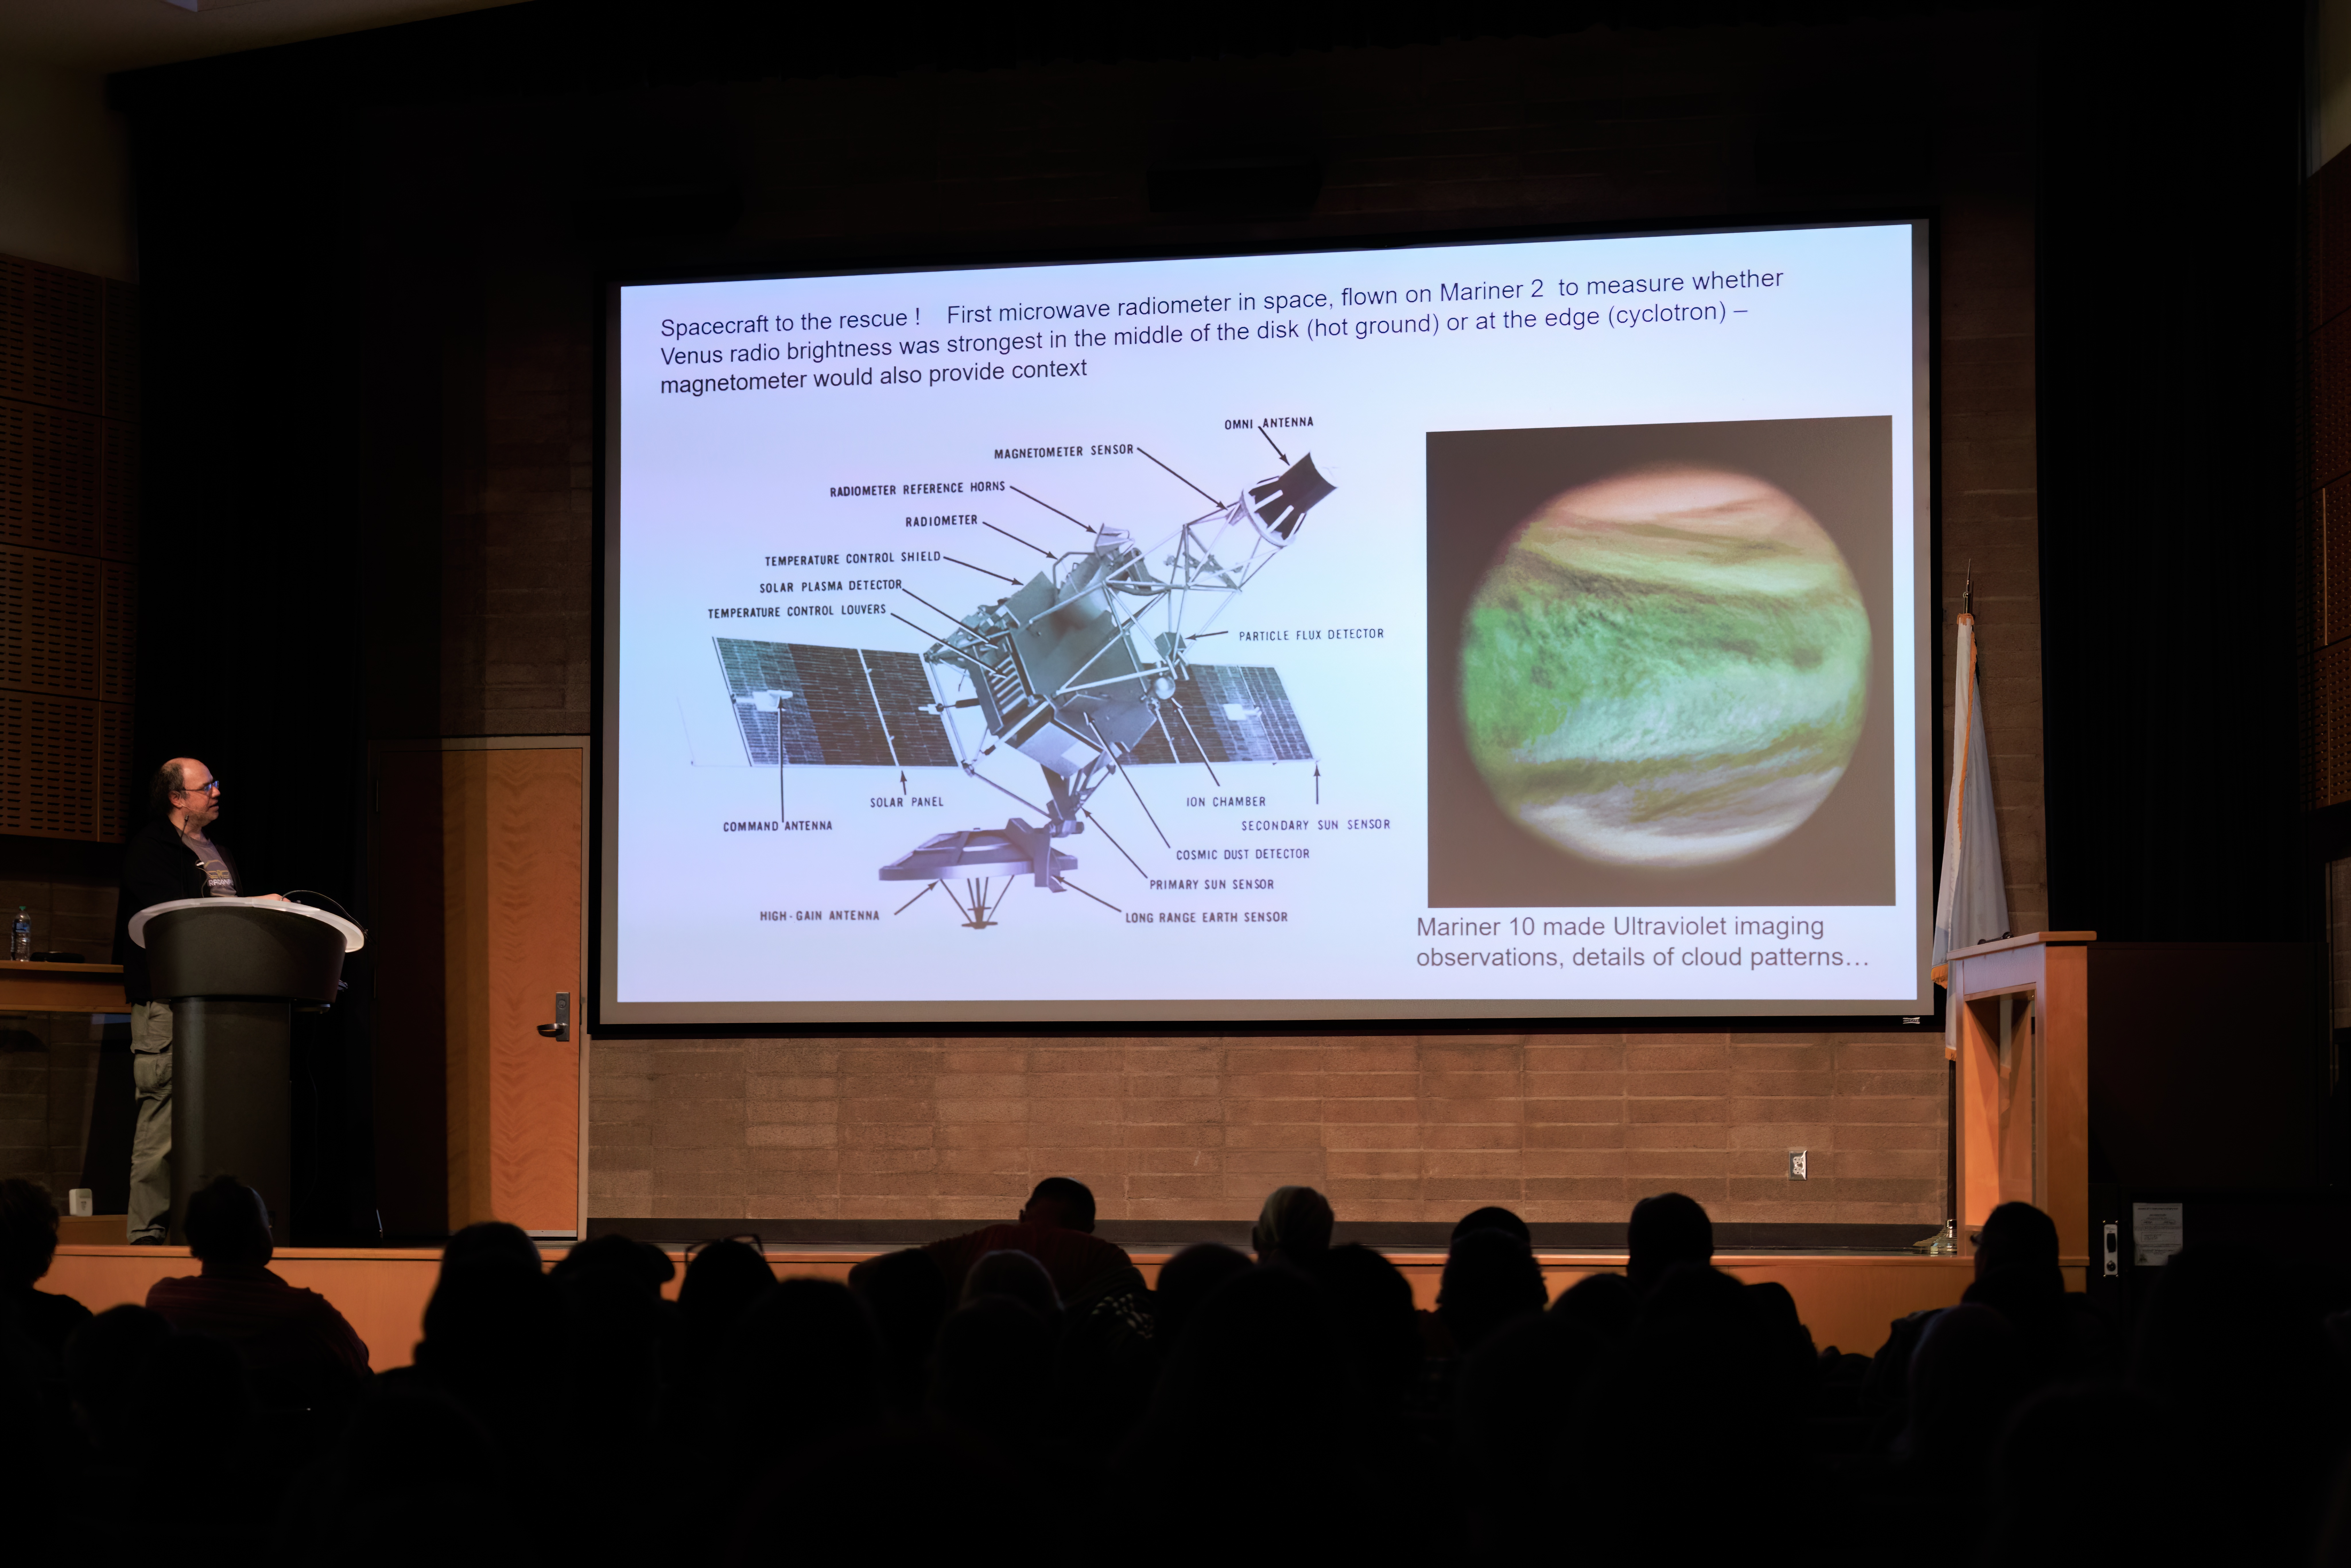 A man stands at a podium on the left side of the stage. A slide with a white background includes a diagram of a Mariner space probe, words, and a red and green ultraviolet image of Venus.